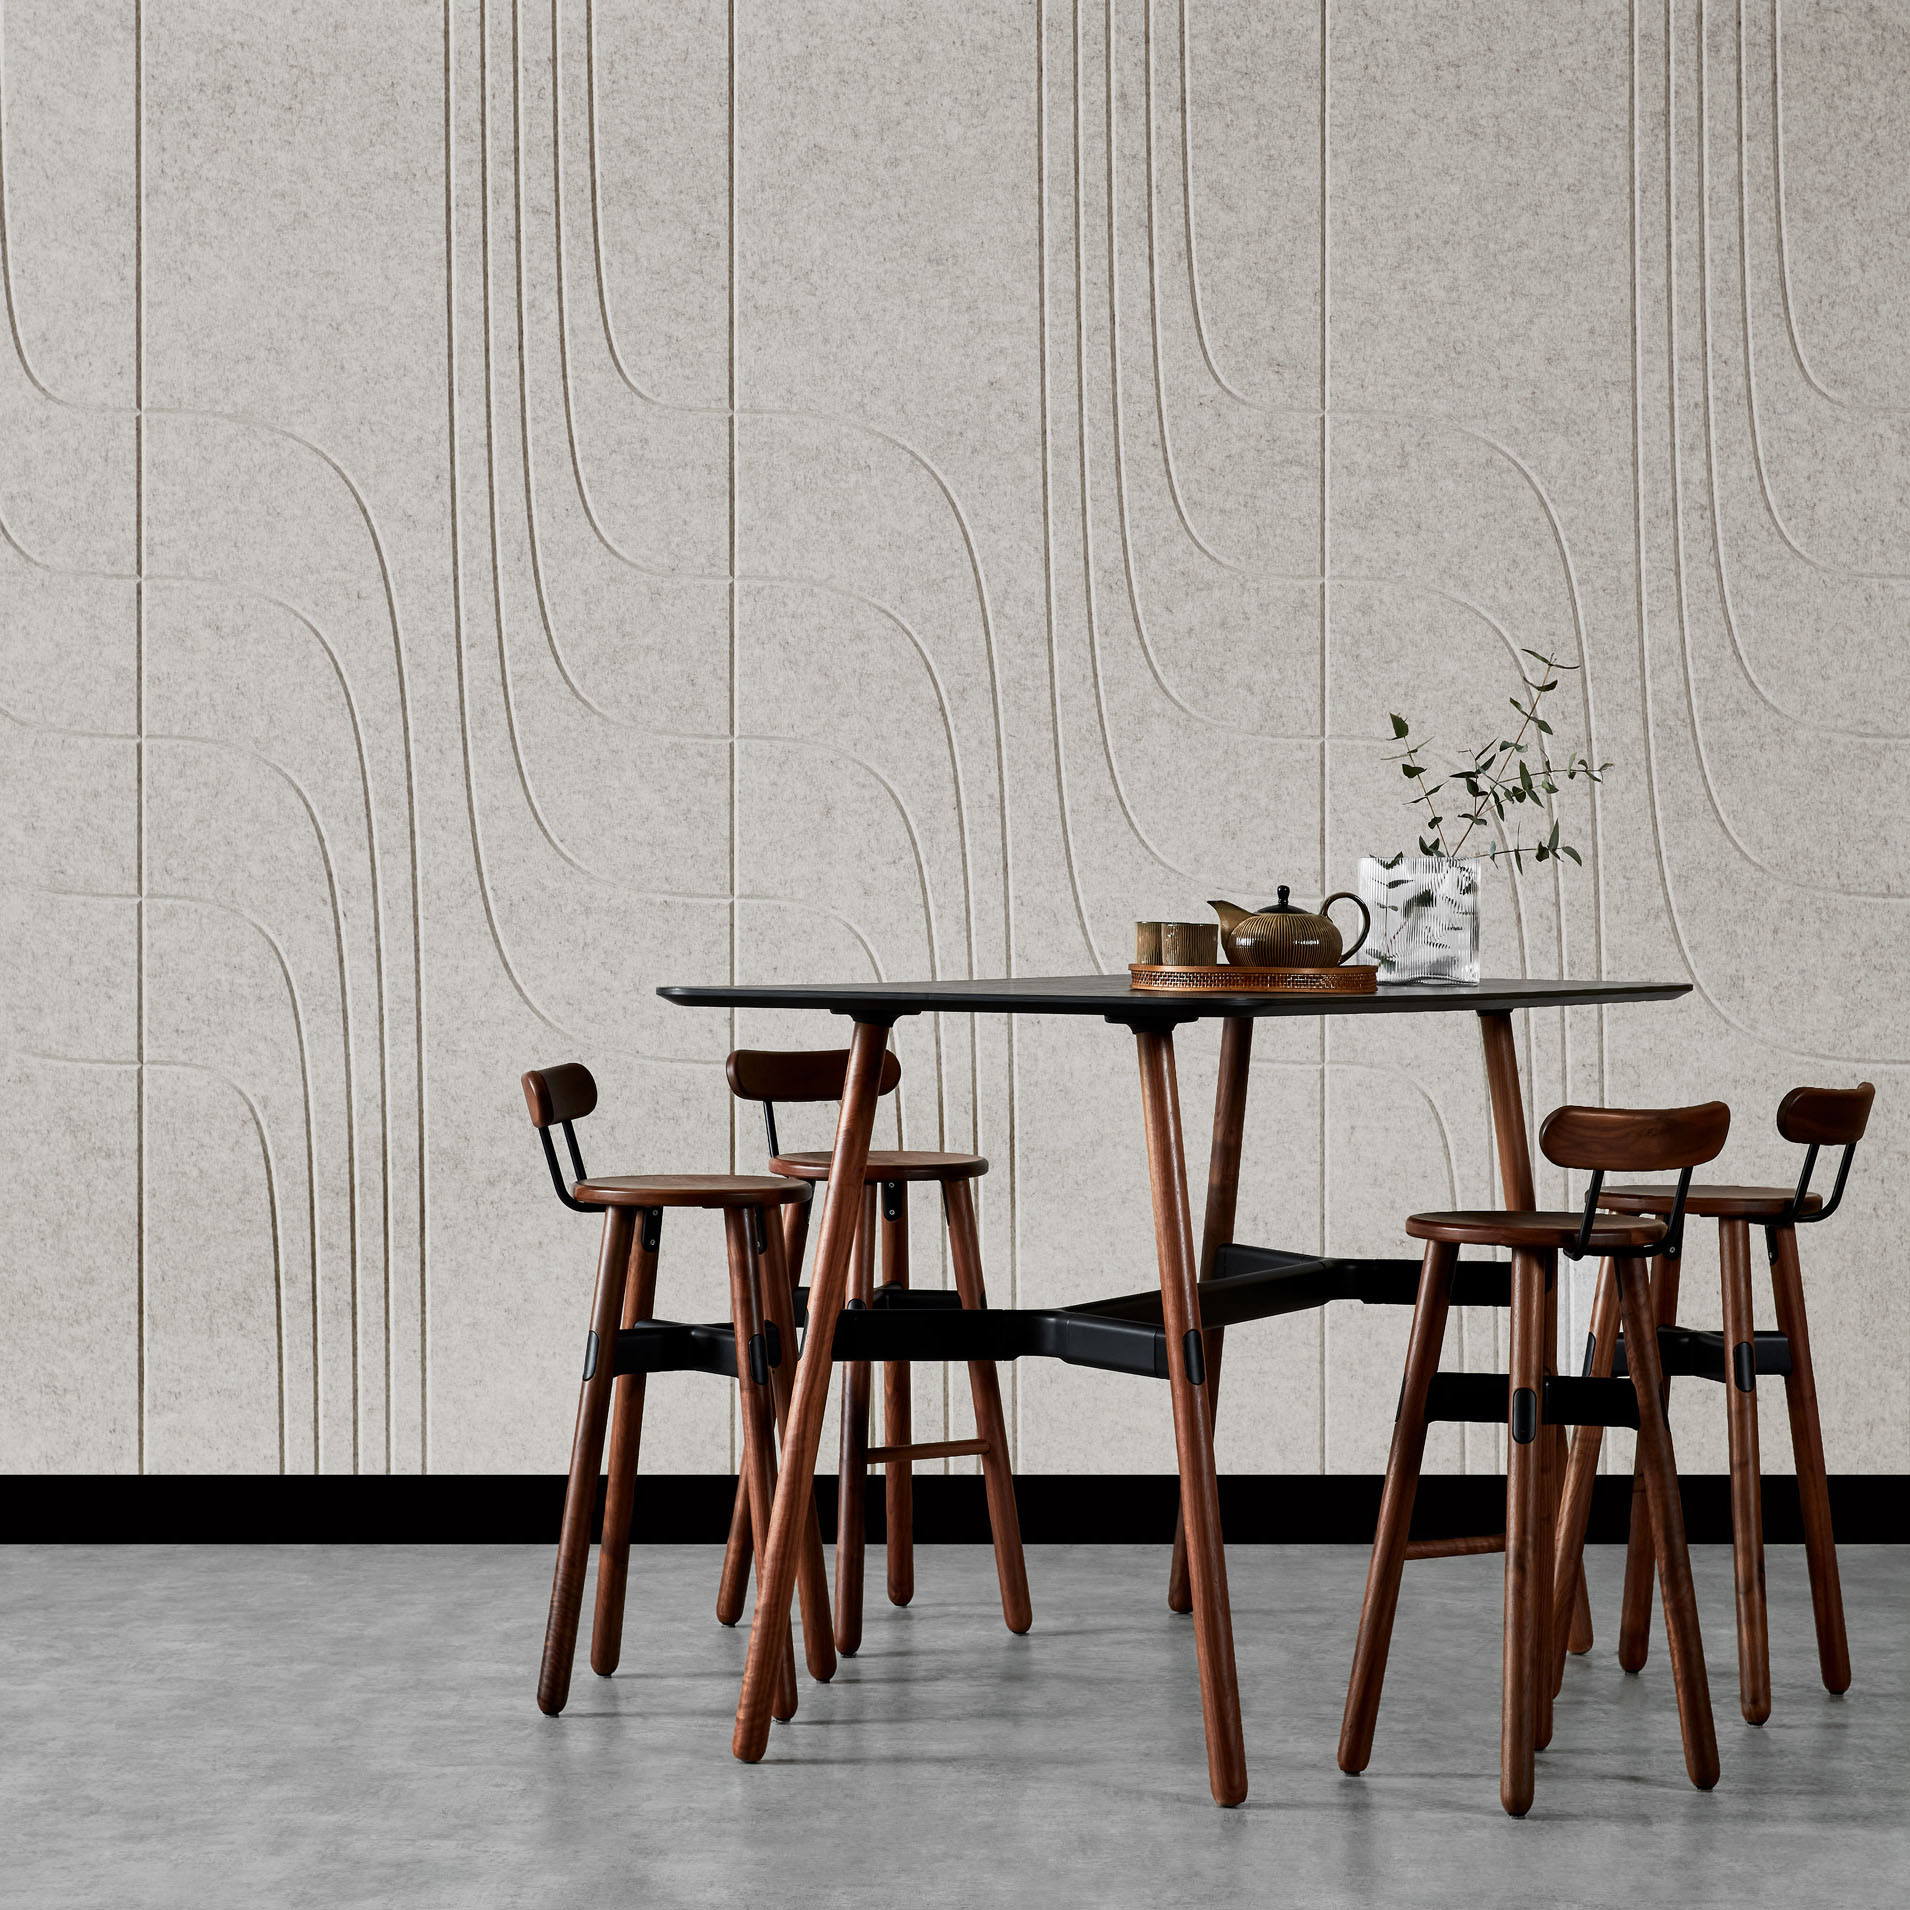 Woven Image launches acoustic panels informed by art deco